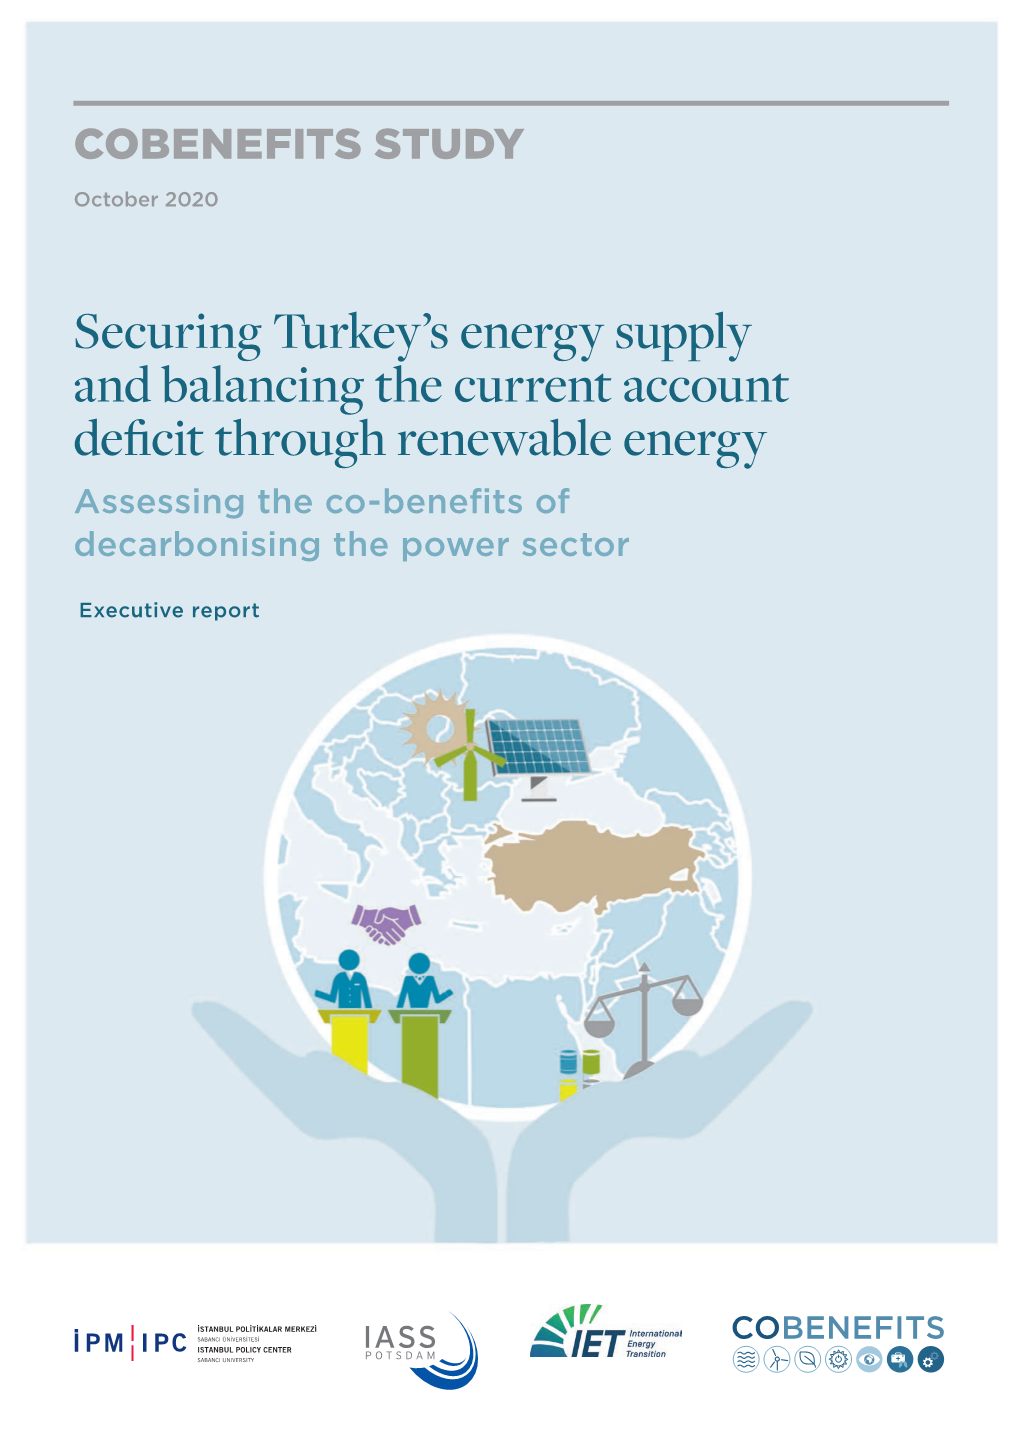 Securing Turkey's Energy Supply and Balancing the Current Account Deficit Through Renewable Energy